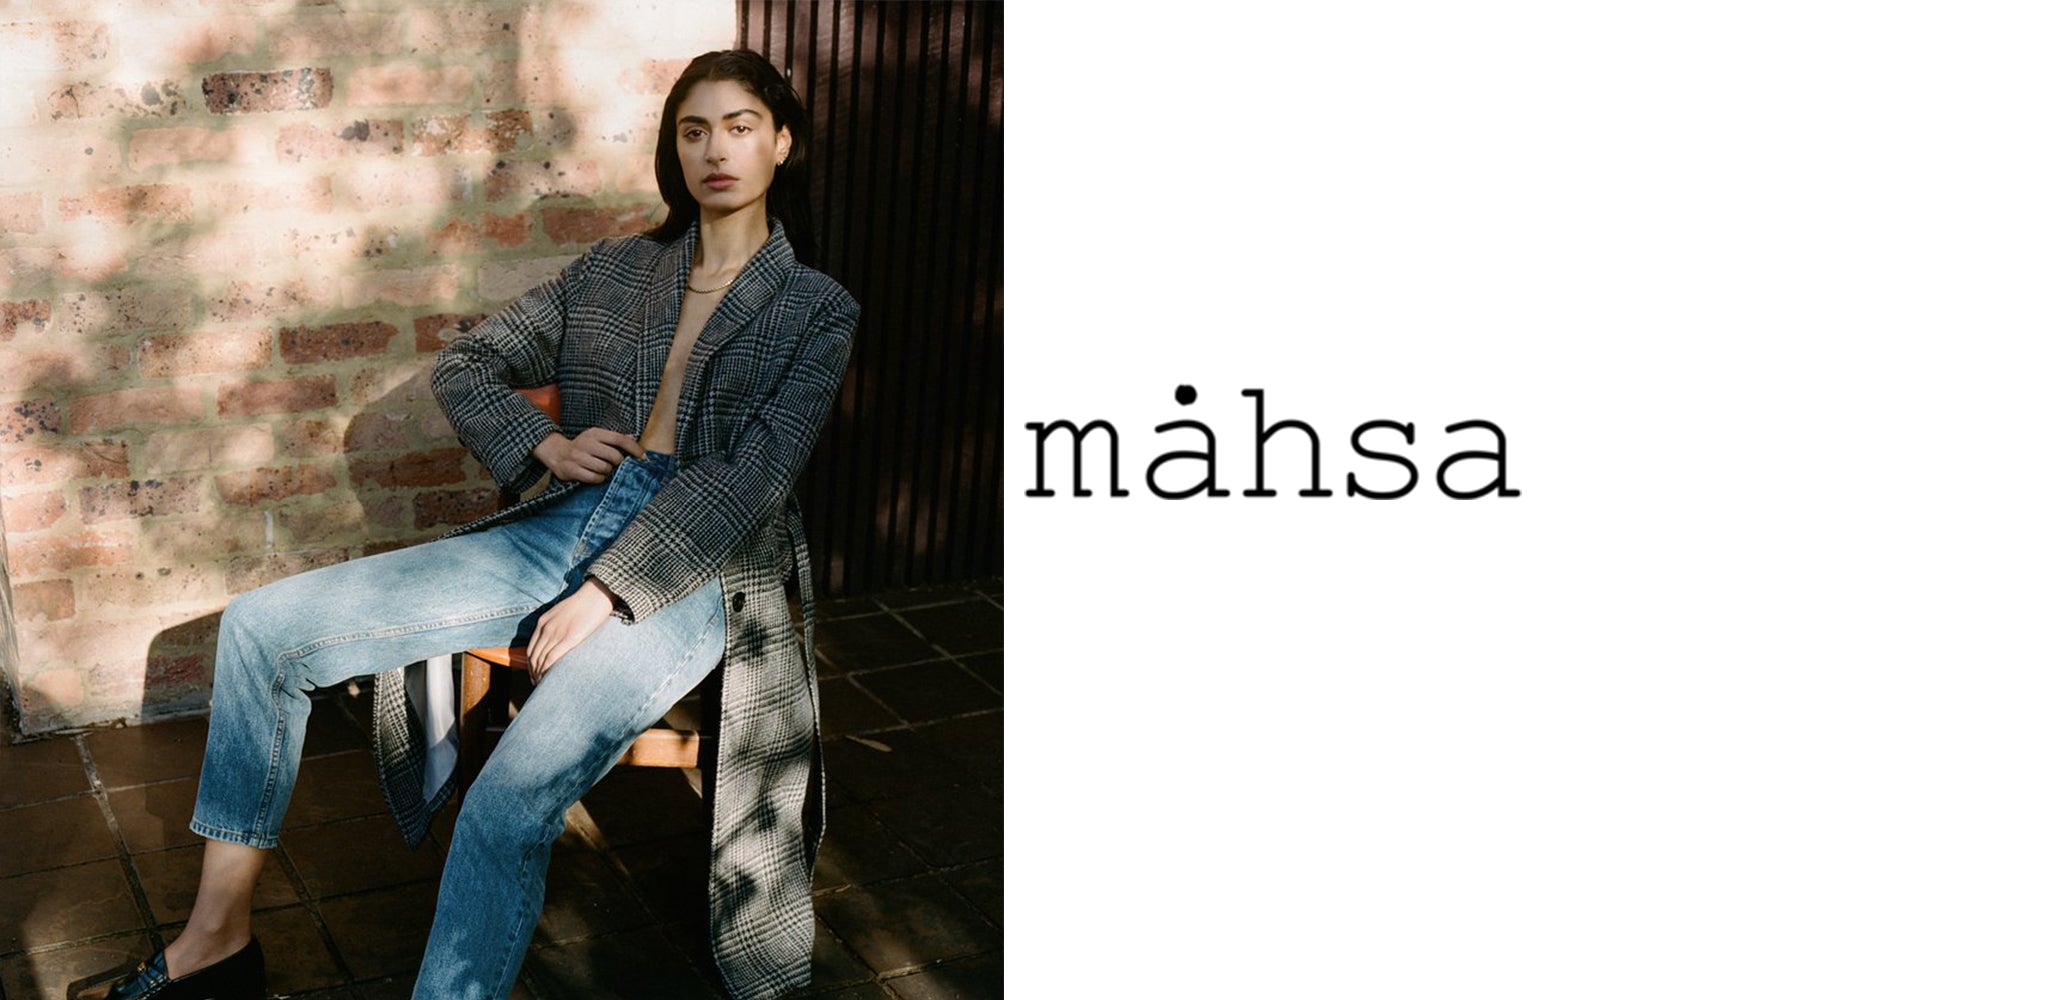 Founded in 2015, Mahsa Label is an evolving reflection of my experience of the beauty and imperfection of life. Imbued with values of simplicity, authenticity and strength, the brand is timeless and sustaining — a love letter to women who live with open hearts and feel things true and tenderly.